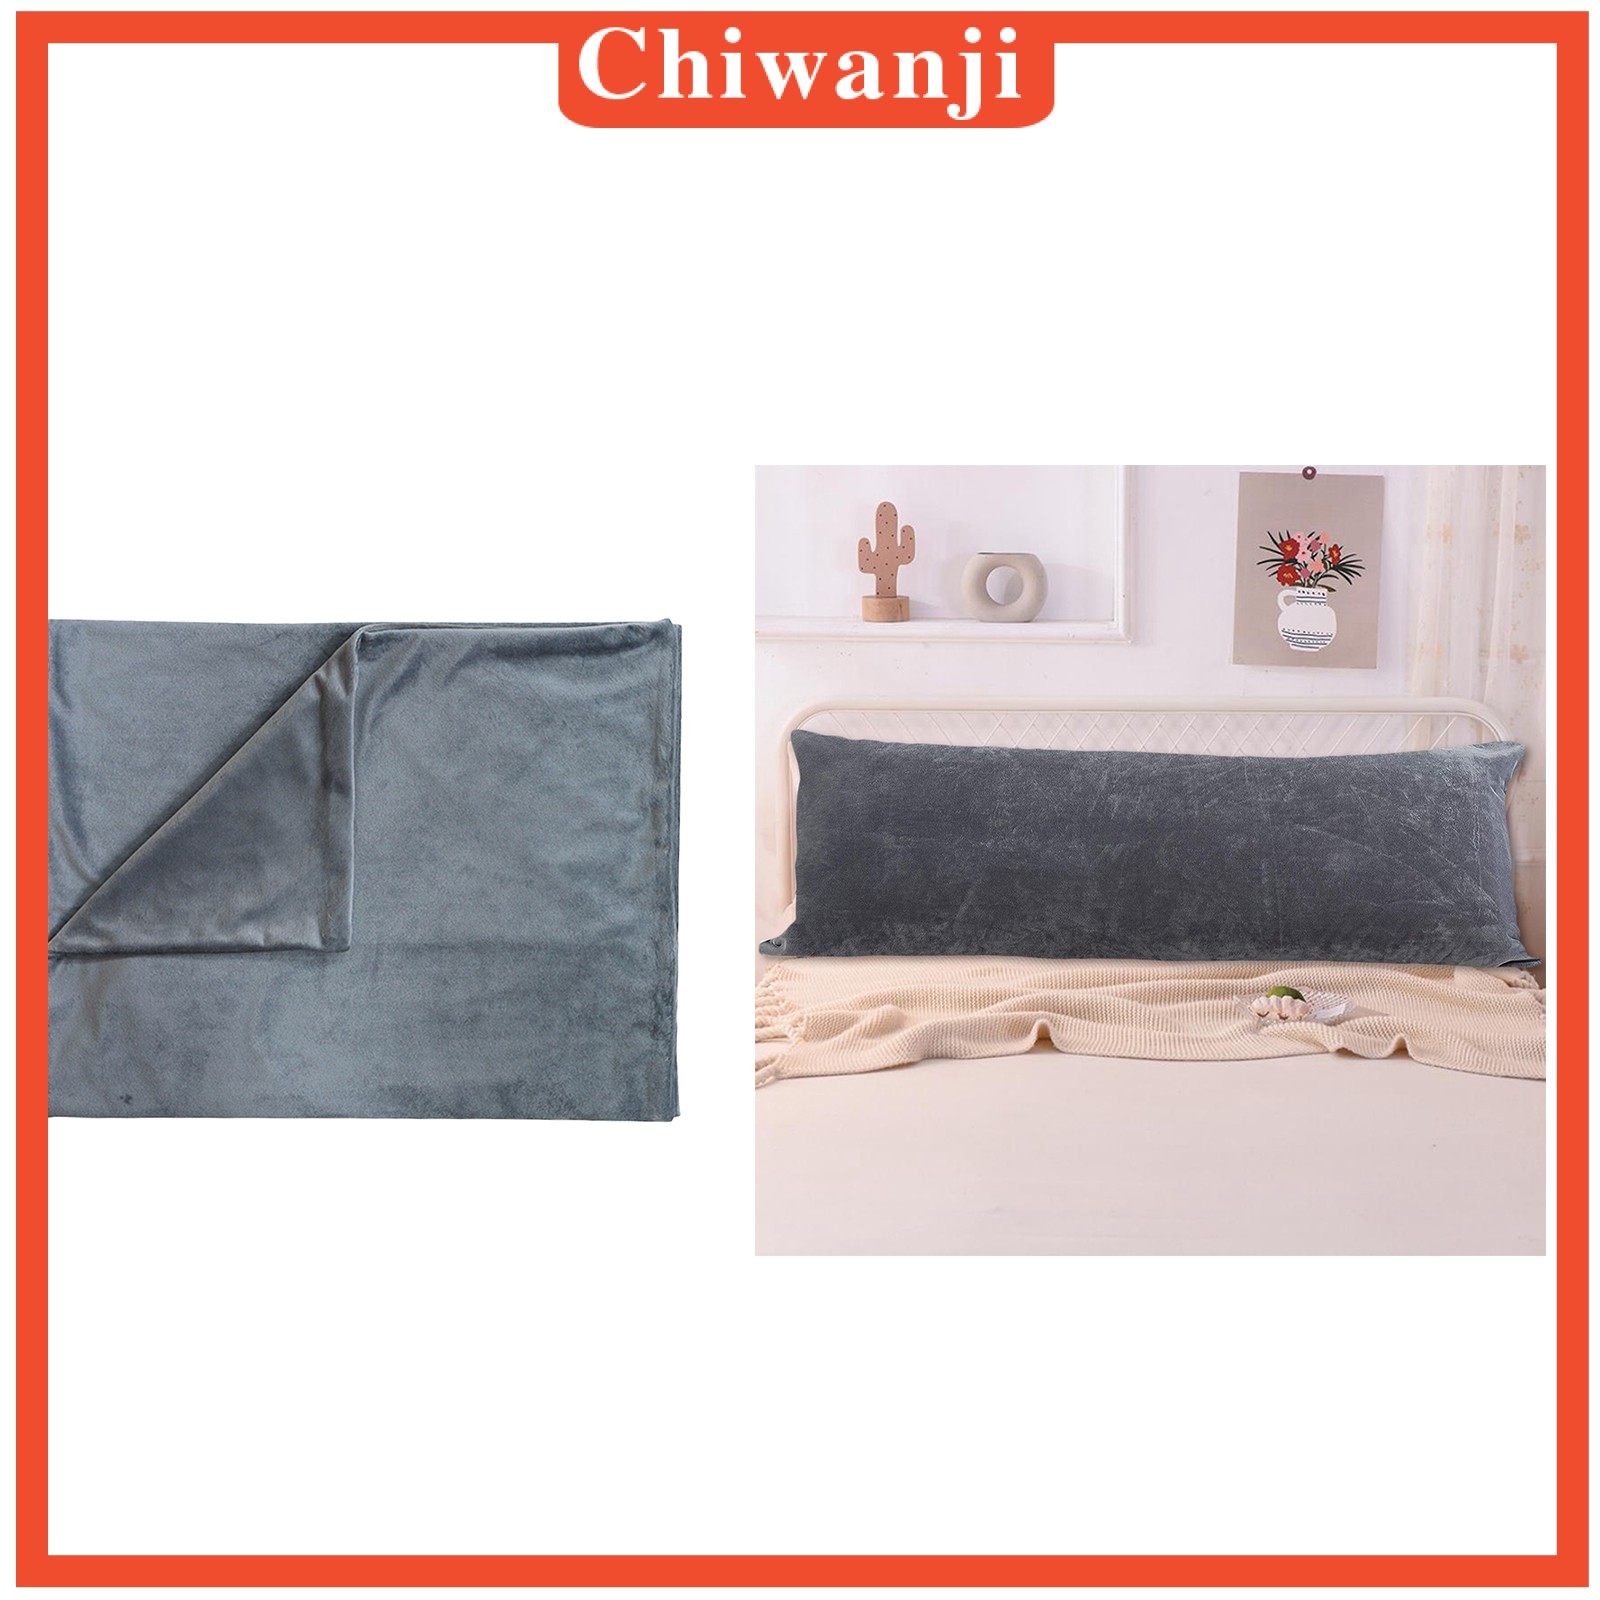 [CHIWANJI] Non-Allergenic Bolster Pillow Case Long Body Support Orthopedic Pregnancy